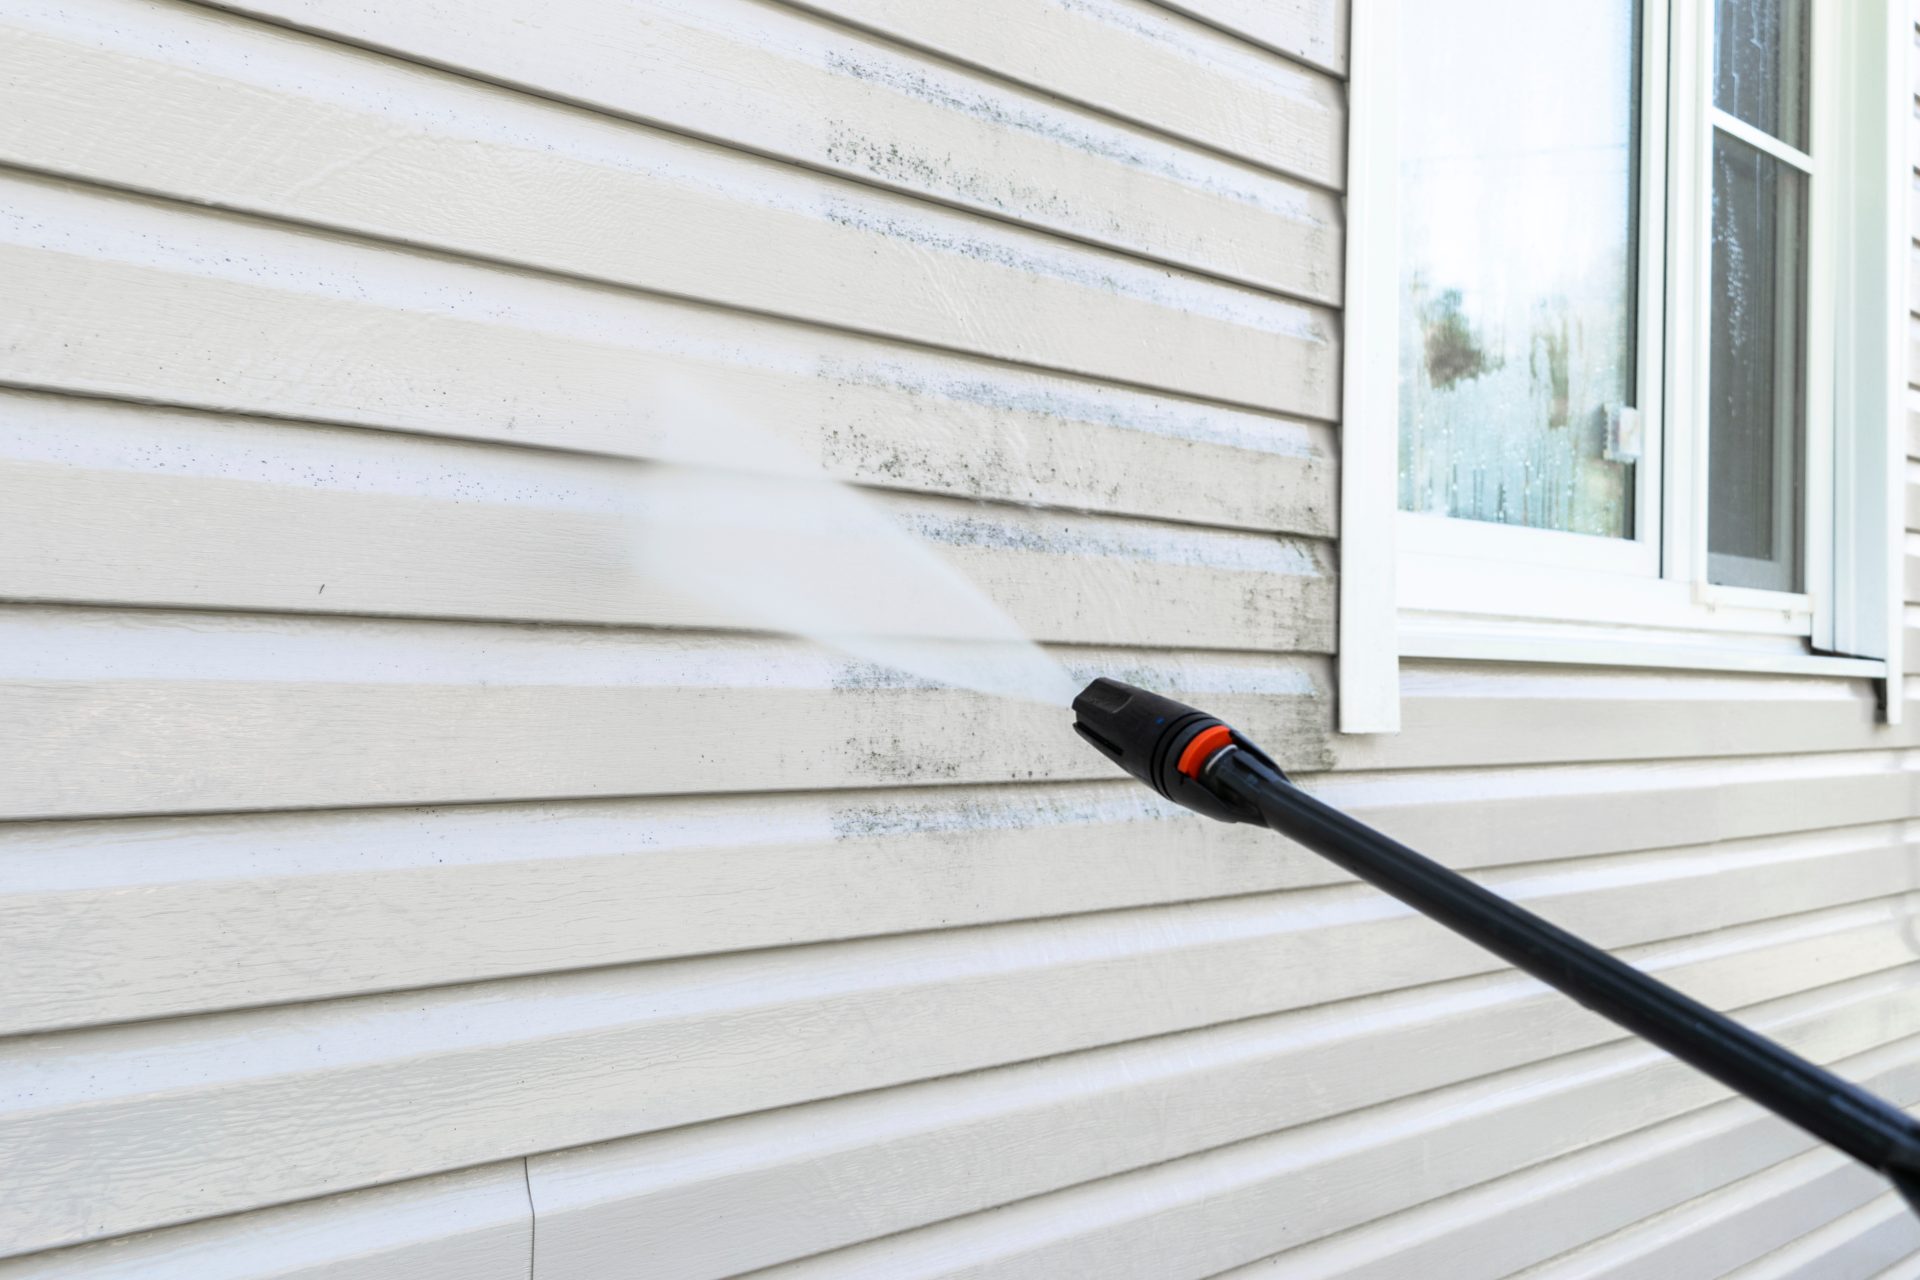 Can Pressure Washing Damage My Property?